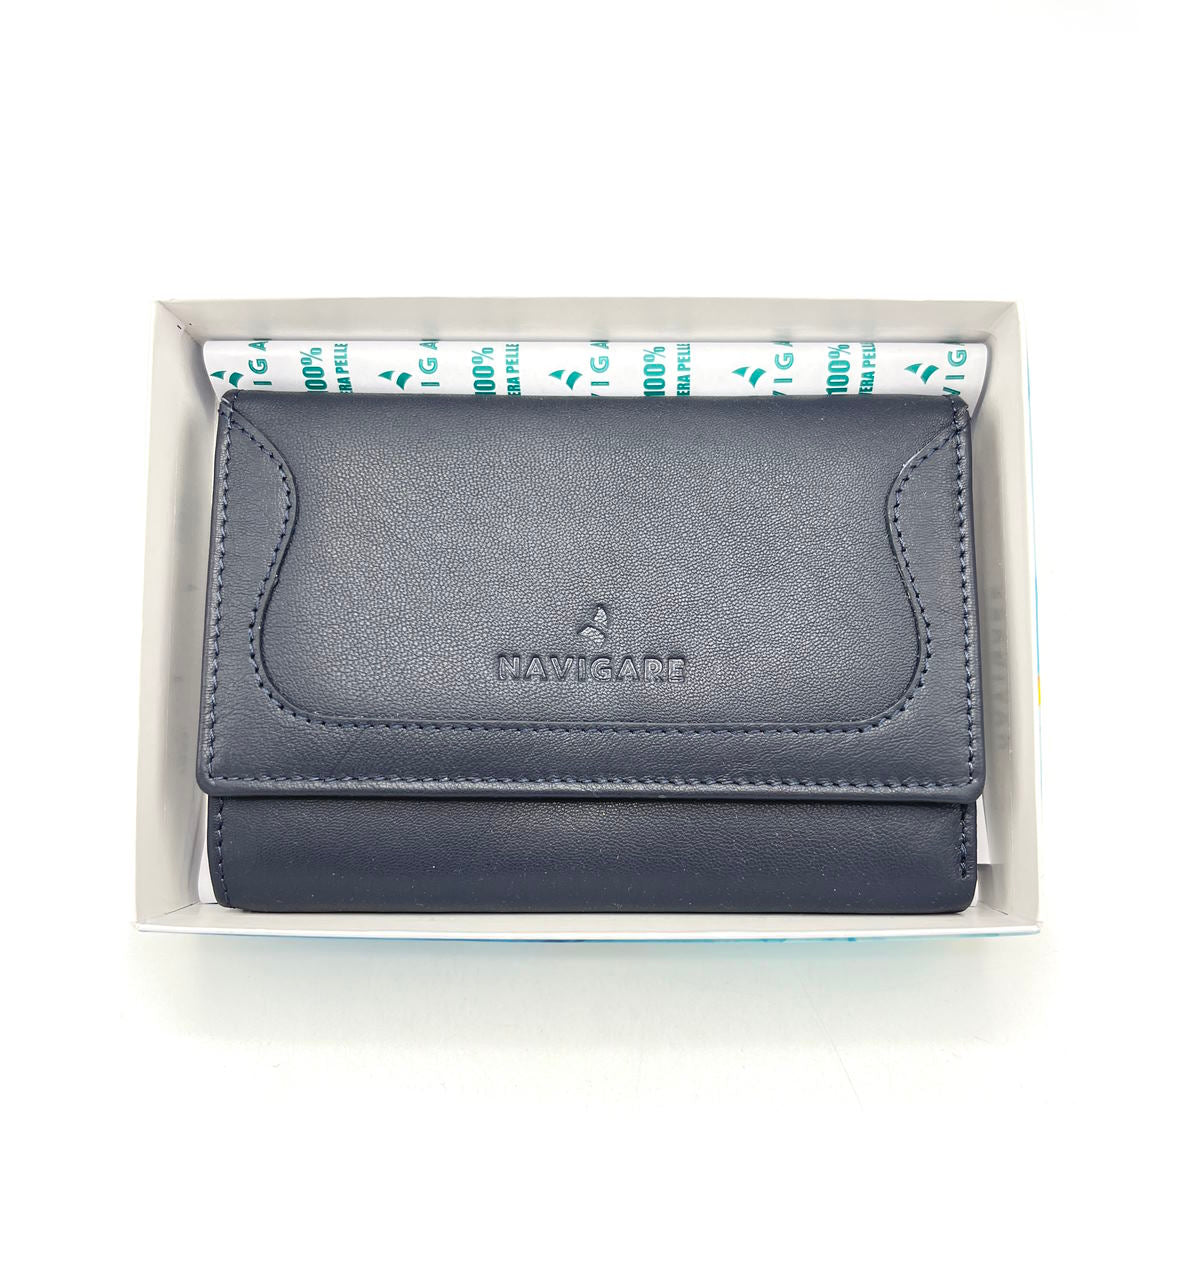 Brand Navigare, Genuine leather wallet, art. PF759-56.062